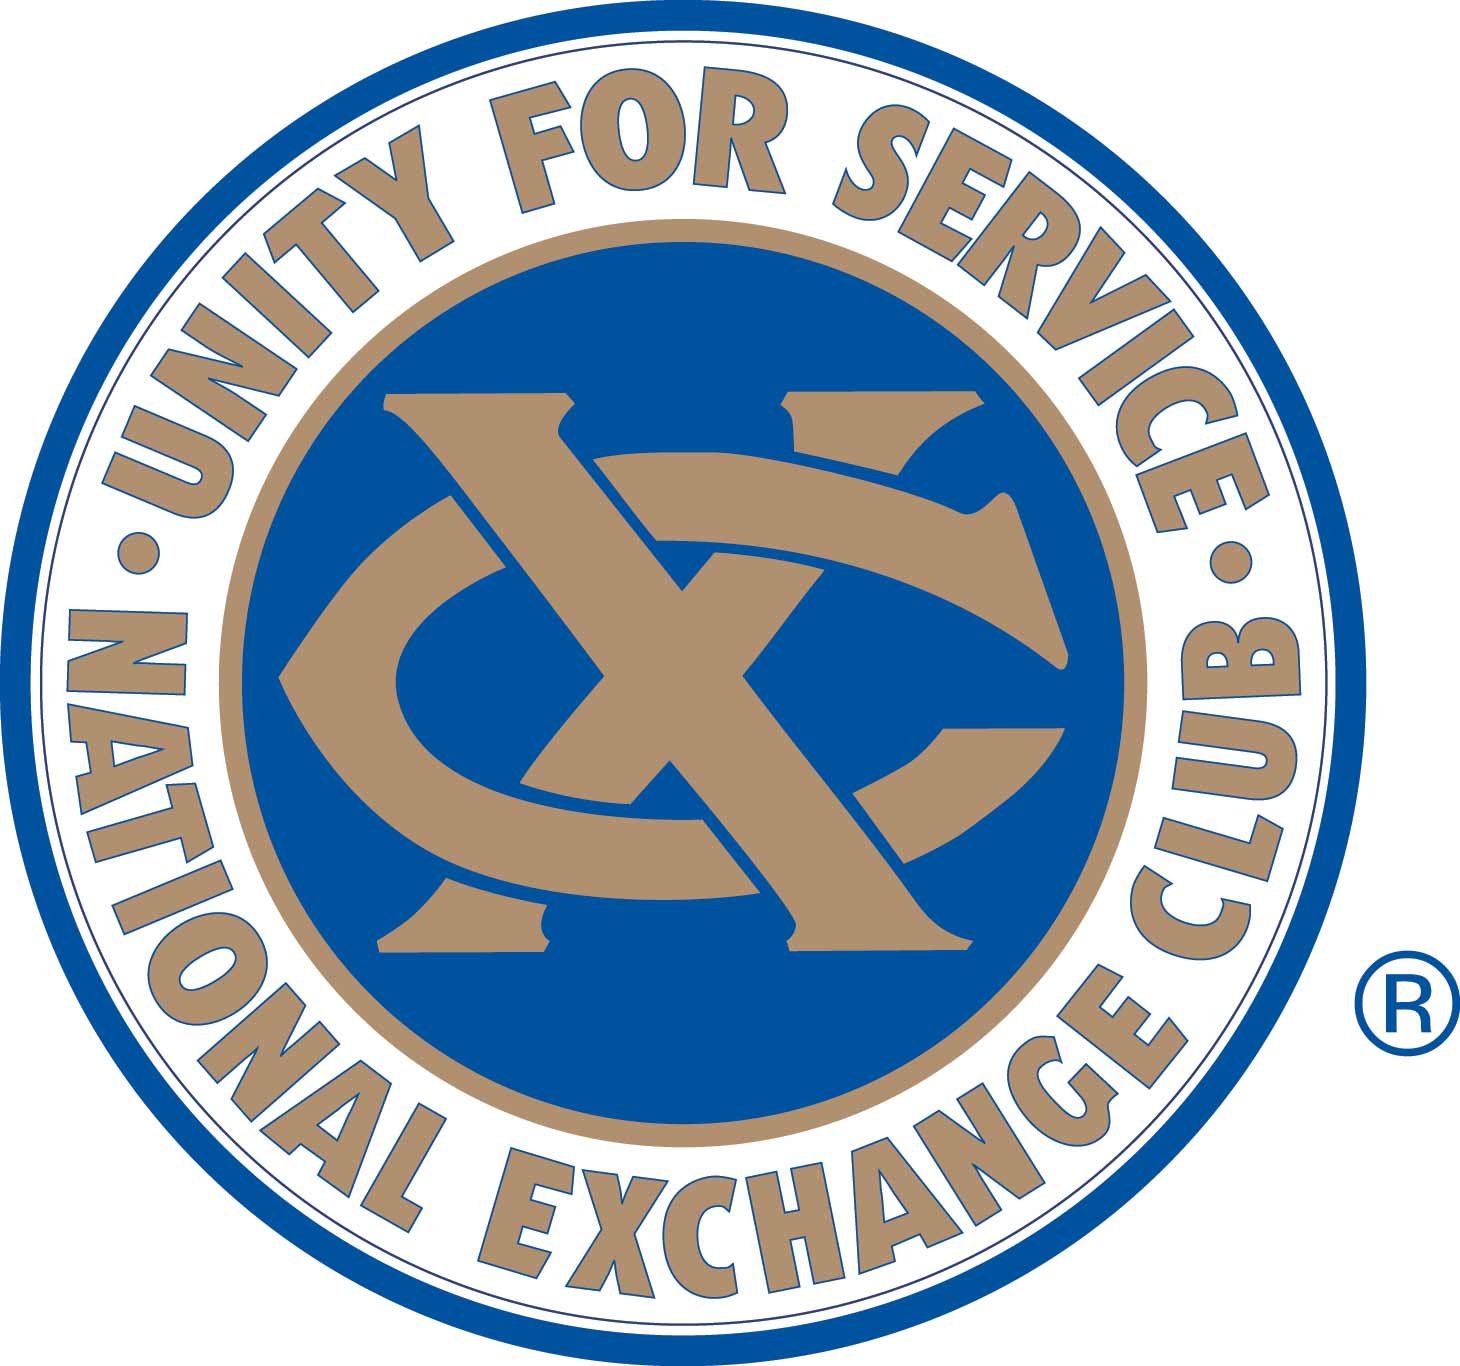 The Exchange Club of Columbus, Inc. is a non-profit charter of the National Exchange Club, representing the community in and around Columbus, Georgia.